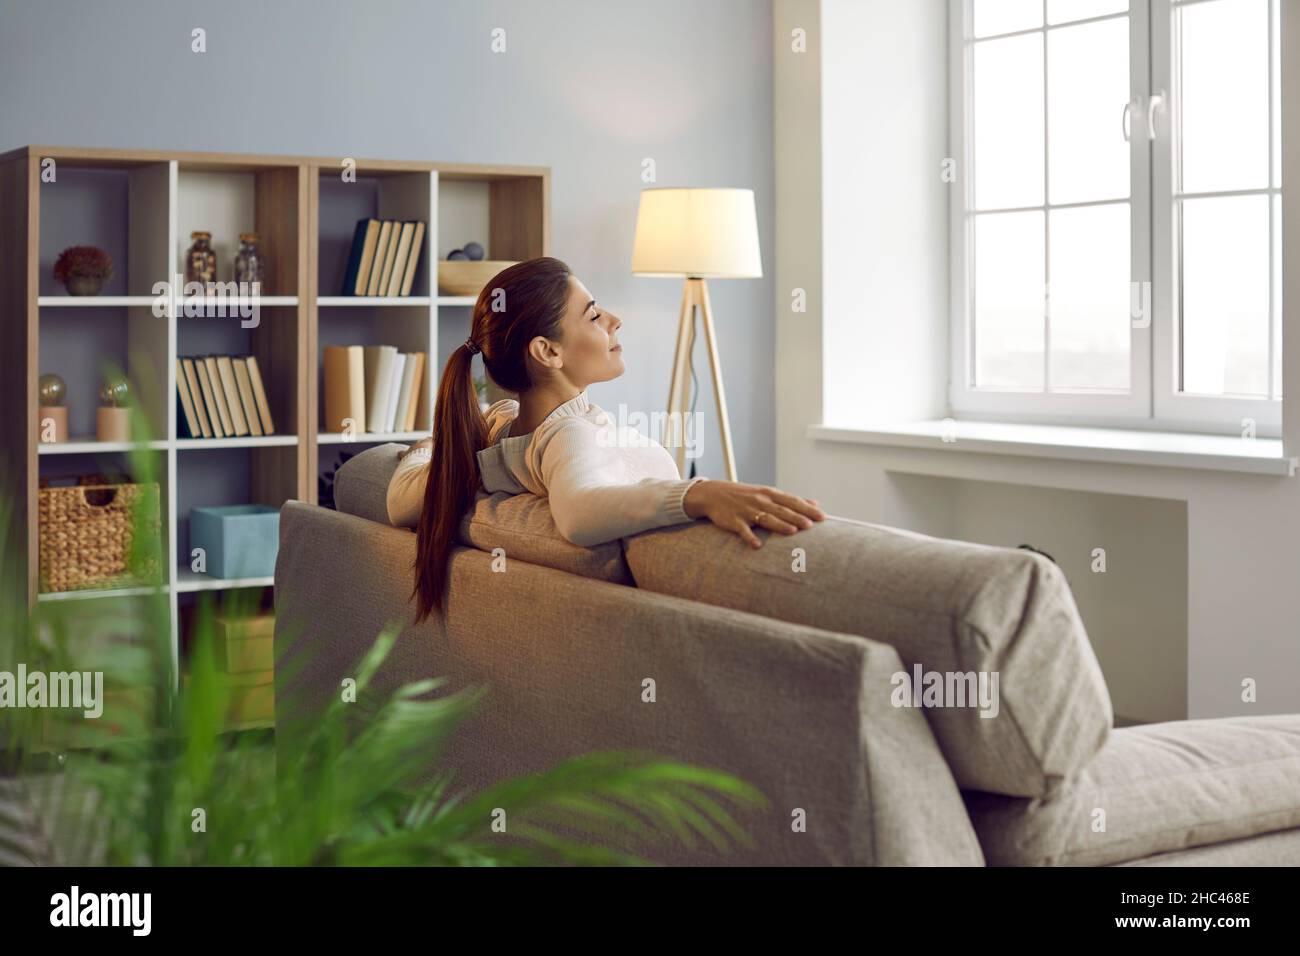 Happy woman enjoying weekend and relaxing on comfortable couch in cozy room at home Stock Photo